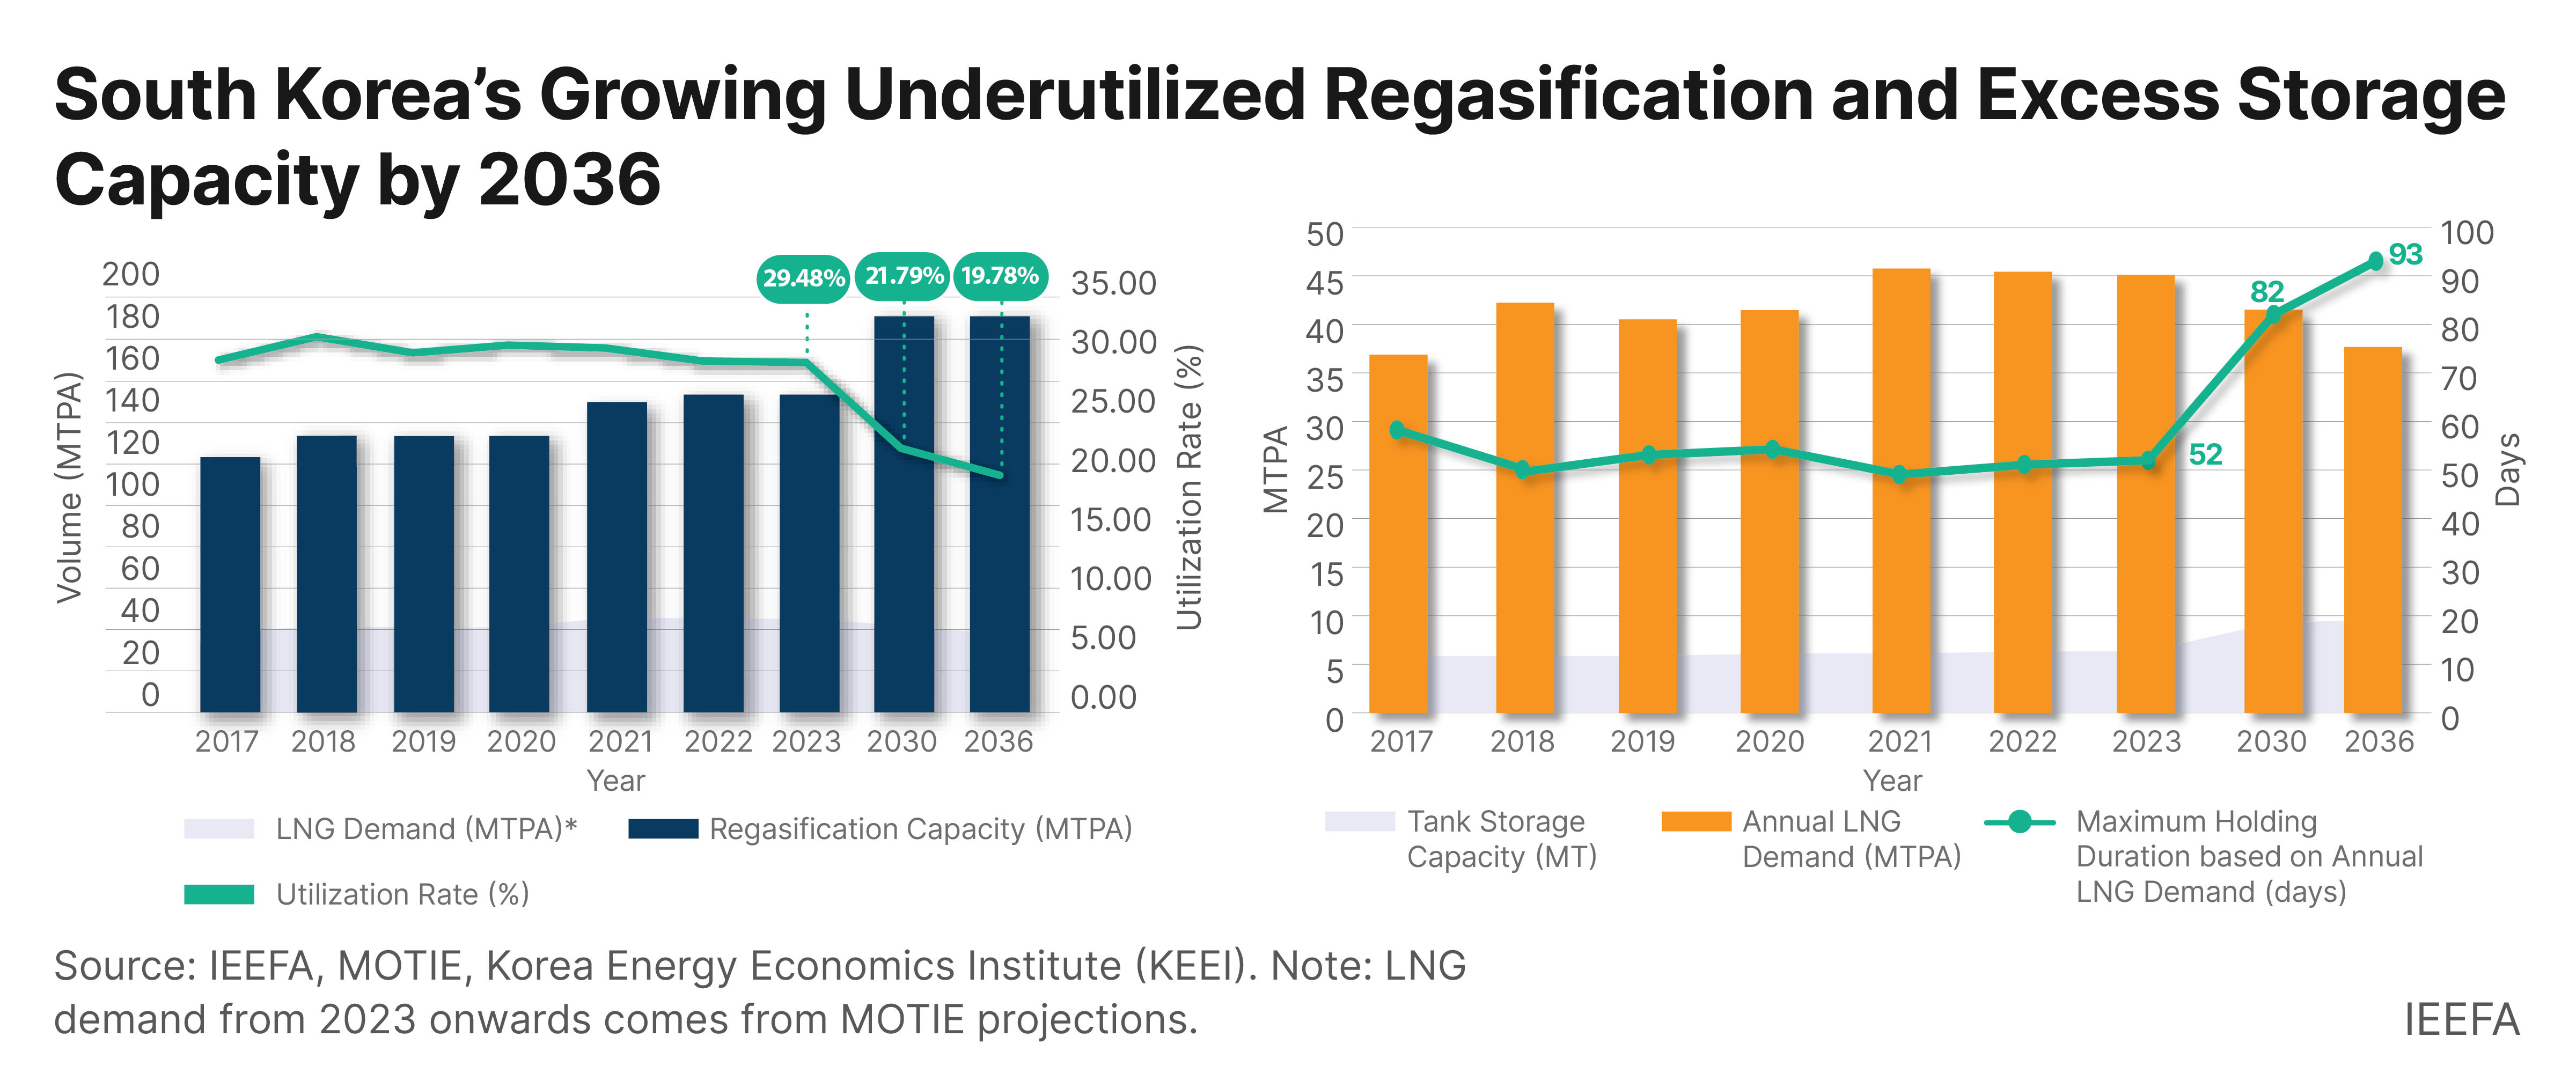 South Korea’s Growing Underutilized Regasification and Excess Storage Capacity by 2036